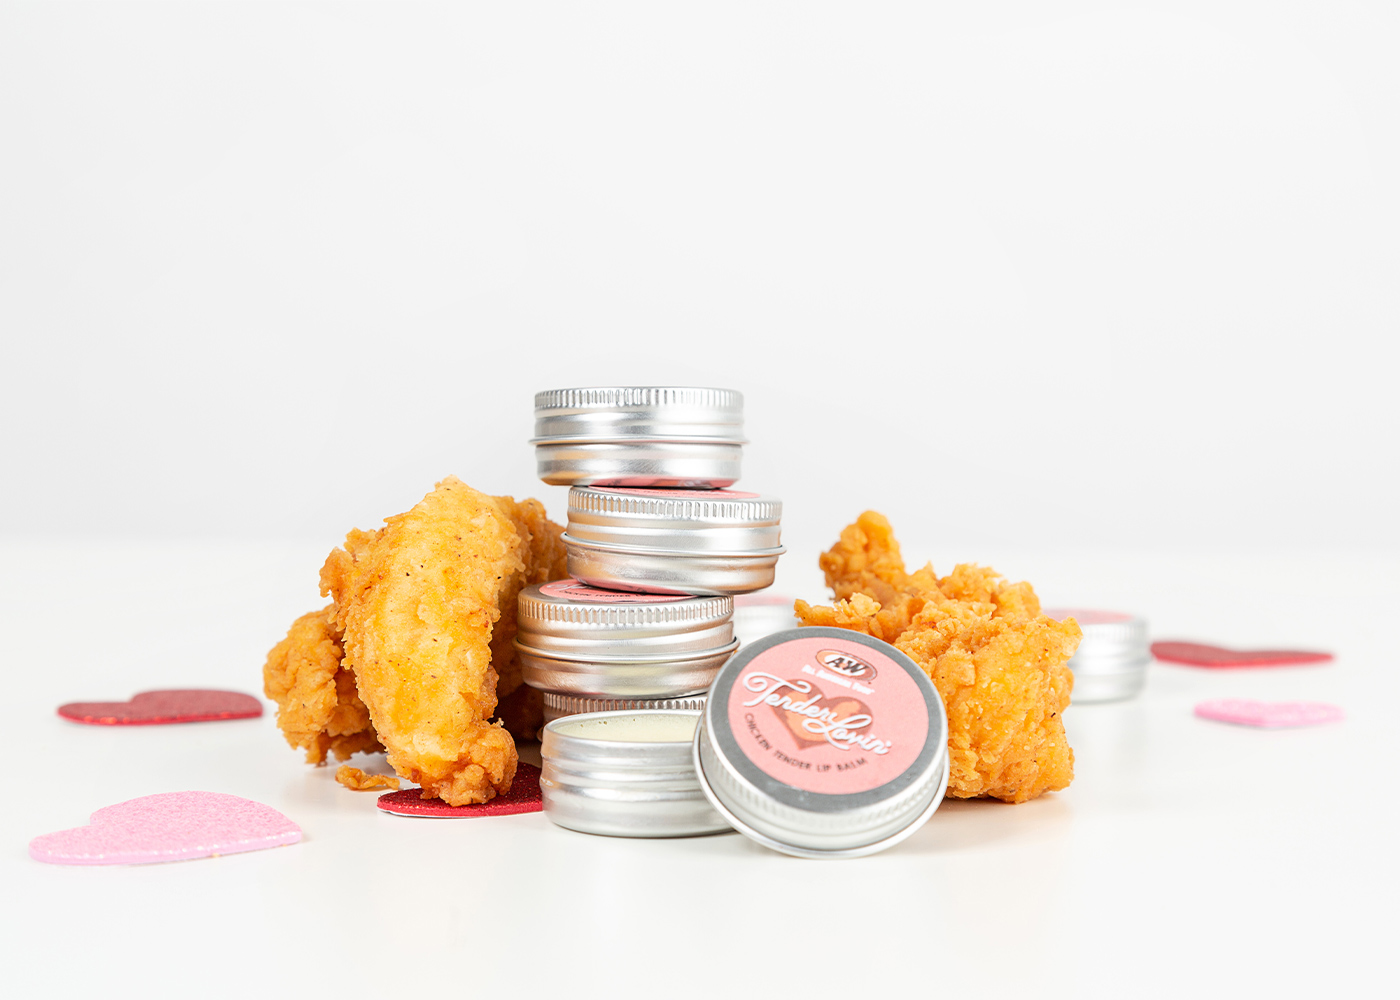 Tins of Tender Lovin' Lip Balm are stacked on top of one another. The tins of Lip Balm are surrounded by Hand-Breaded Chicken Tenders and pink hearts.